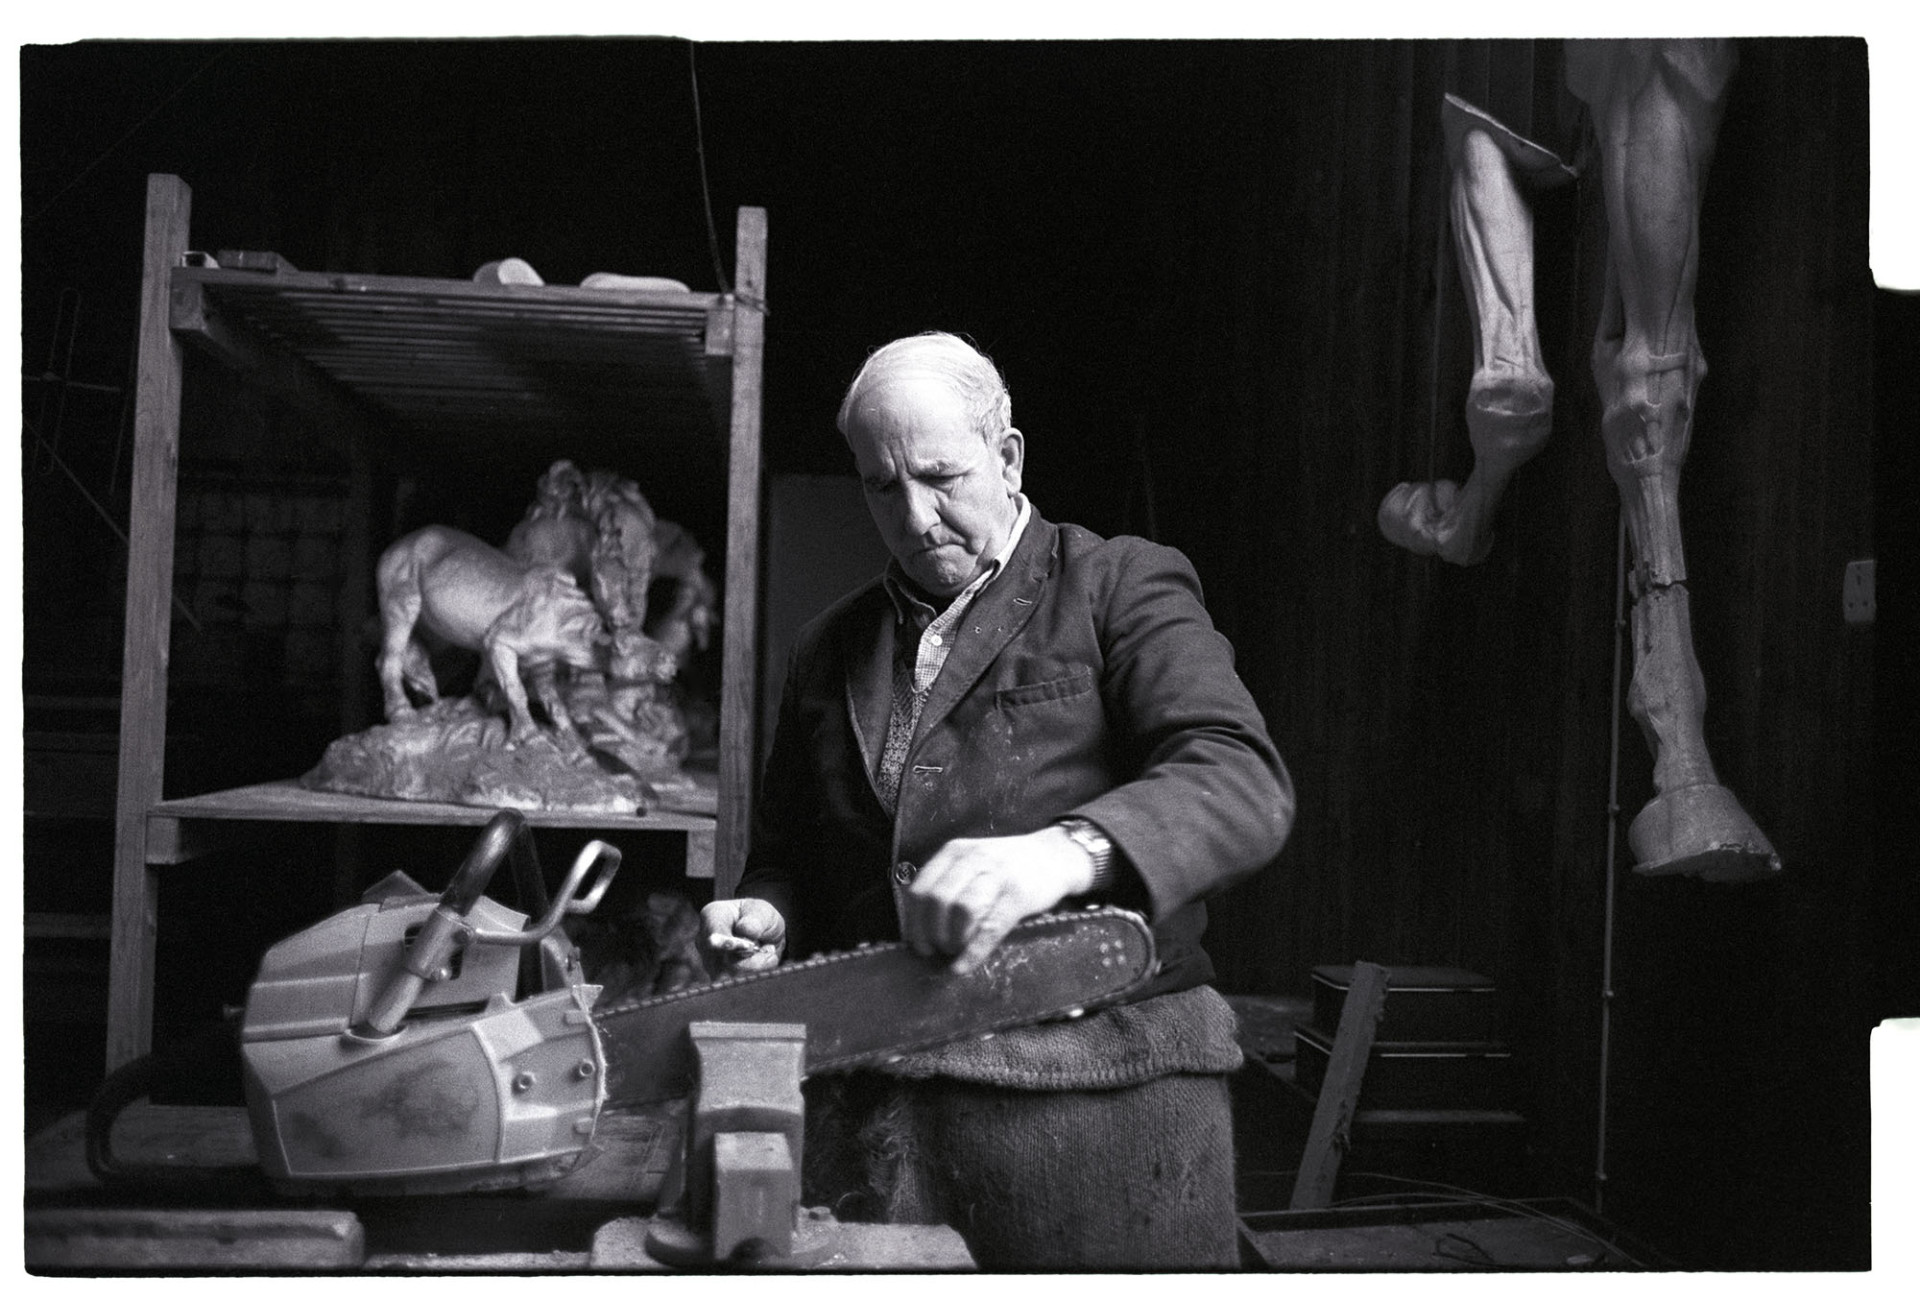 Man sharpening chain saw in workshop, formerly sculptors studio, with sculpture. 
[Horace Baker sharpening his chainsaw in his workshop at Halsdon House, Dolton. The workshop used to be a sculptors studio and two sculptures of horses are in the background.]